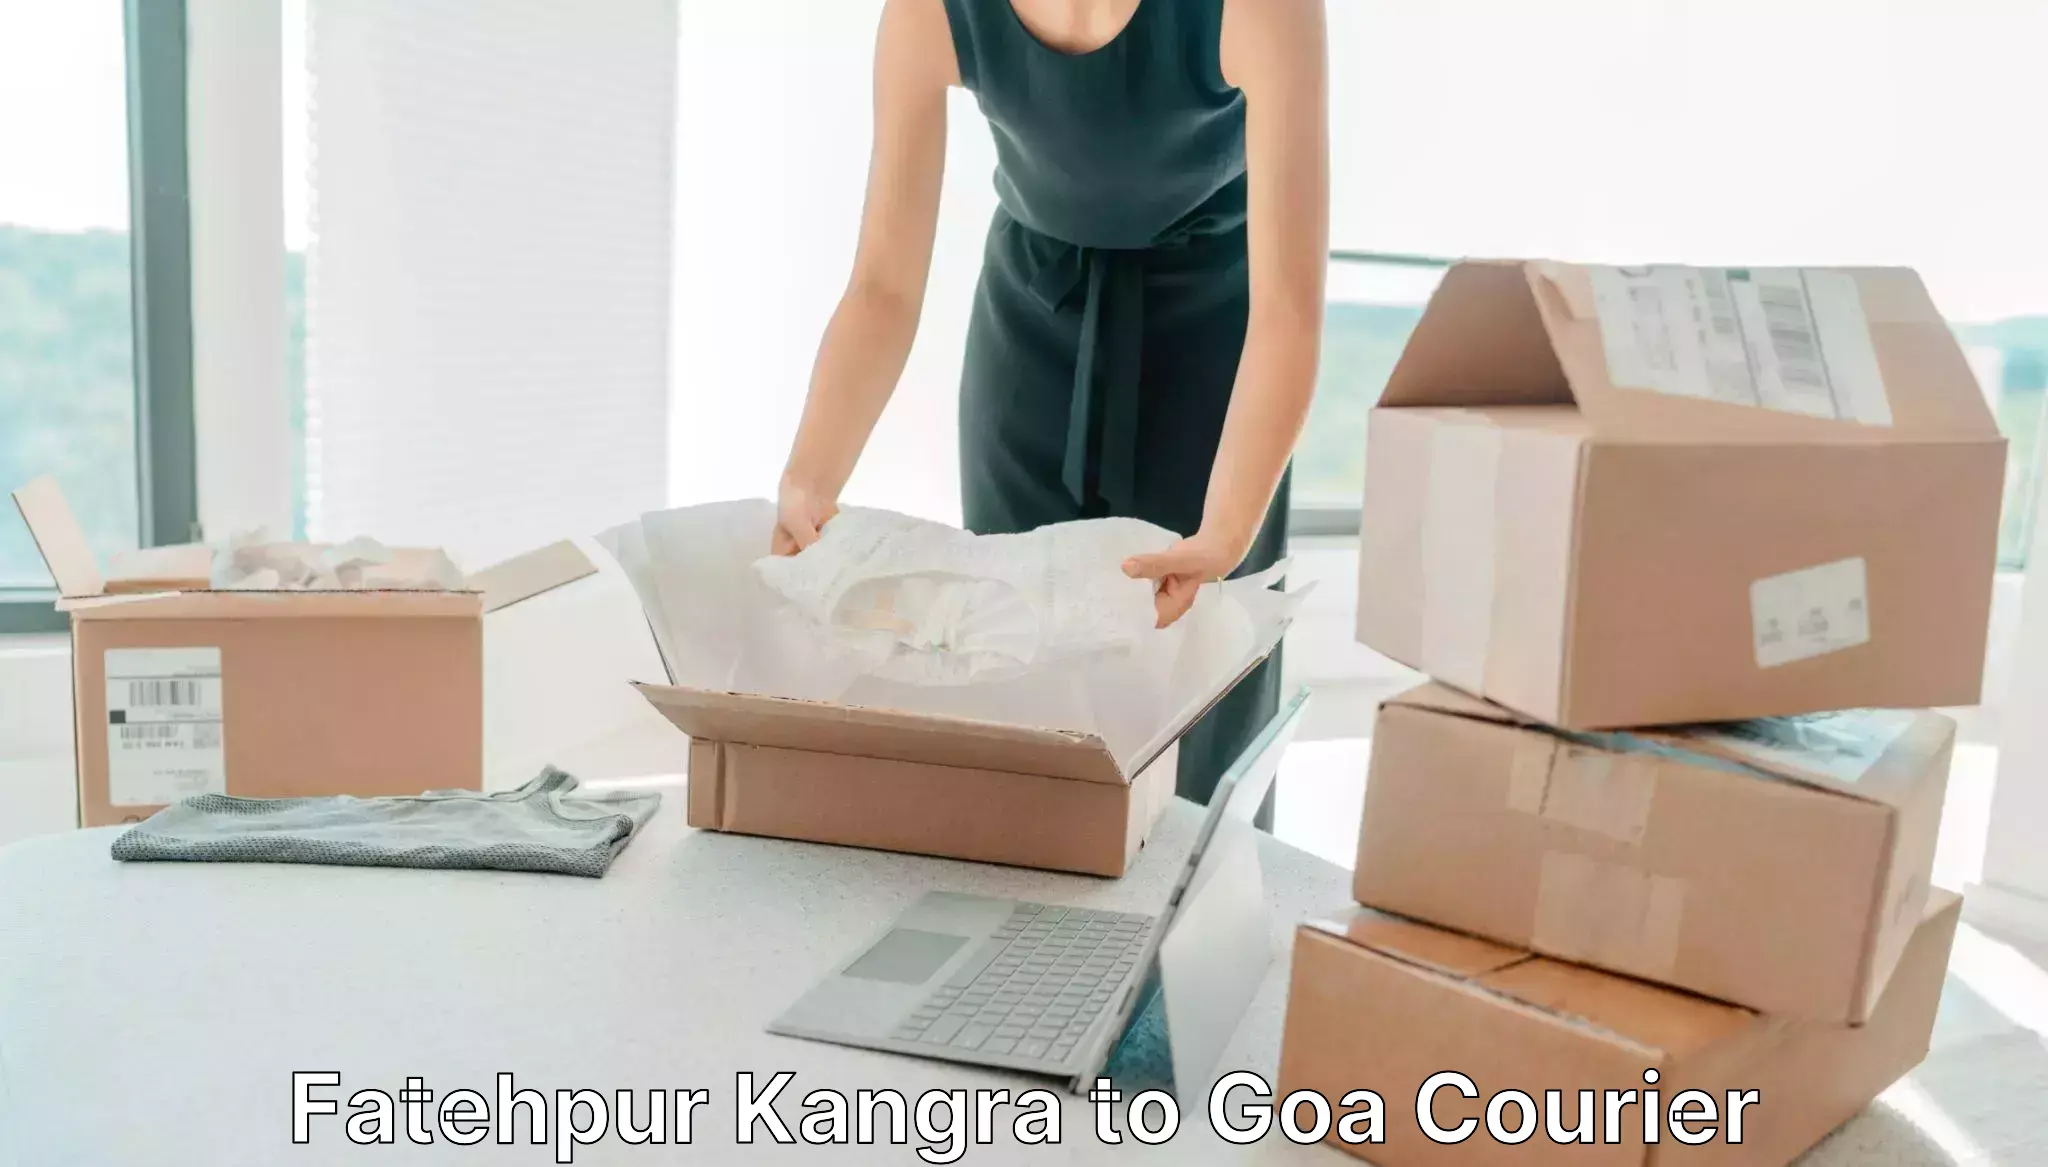 Overnight delivery services Fatehpur Kangra to Goa